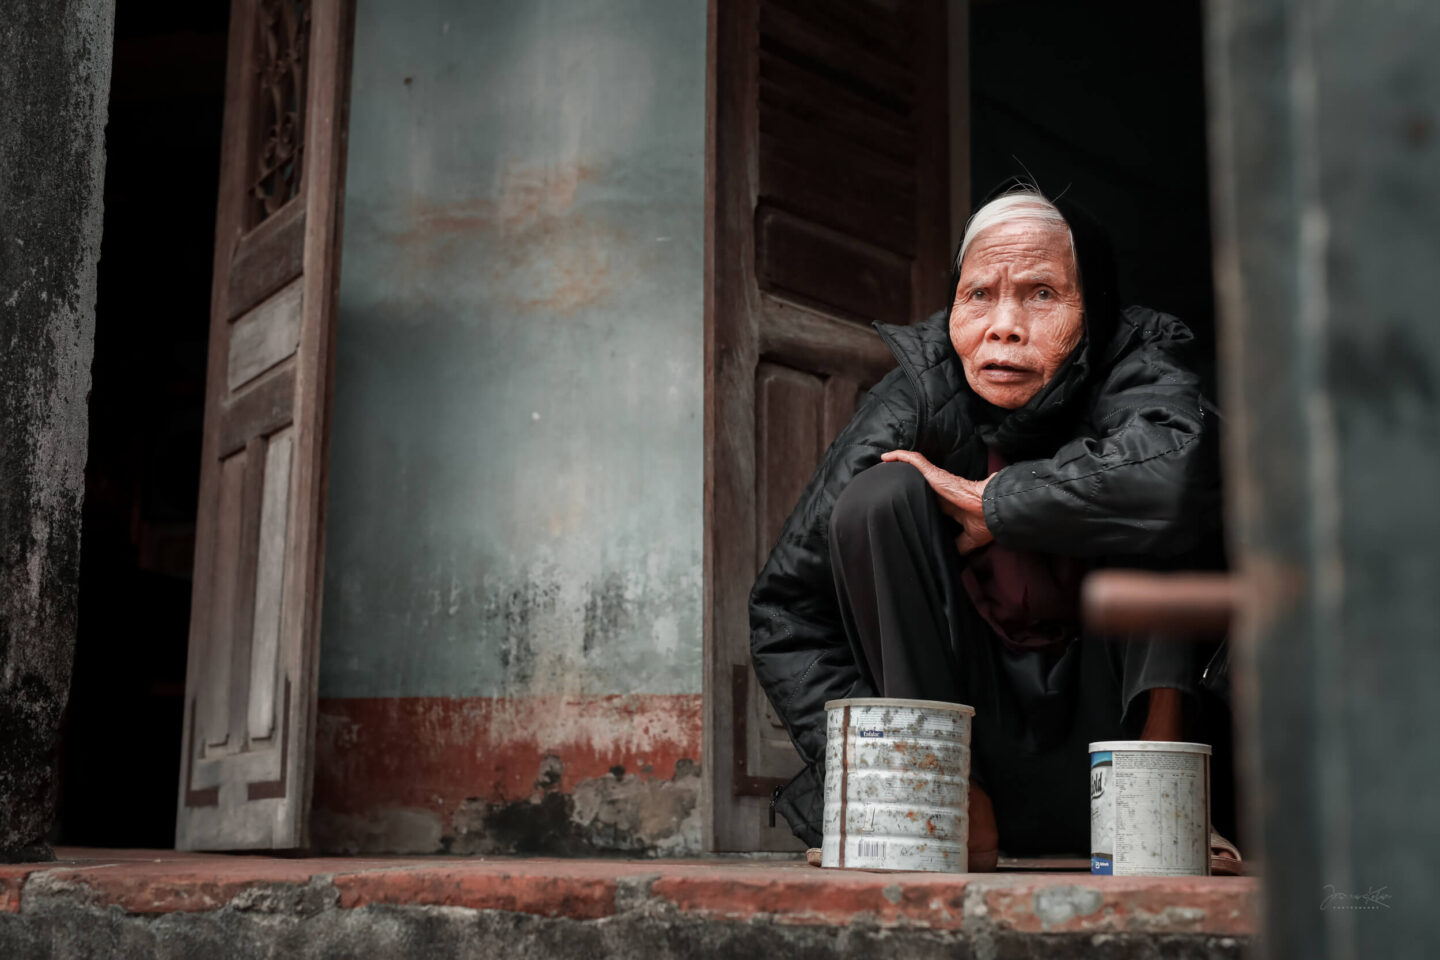 A woman rests on the porch of her house in Duong Lam ancient village near Hanoi.